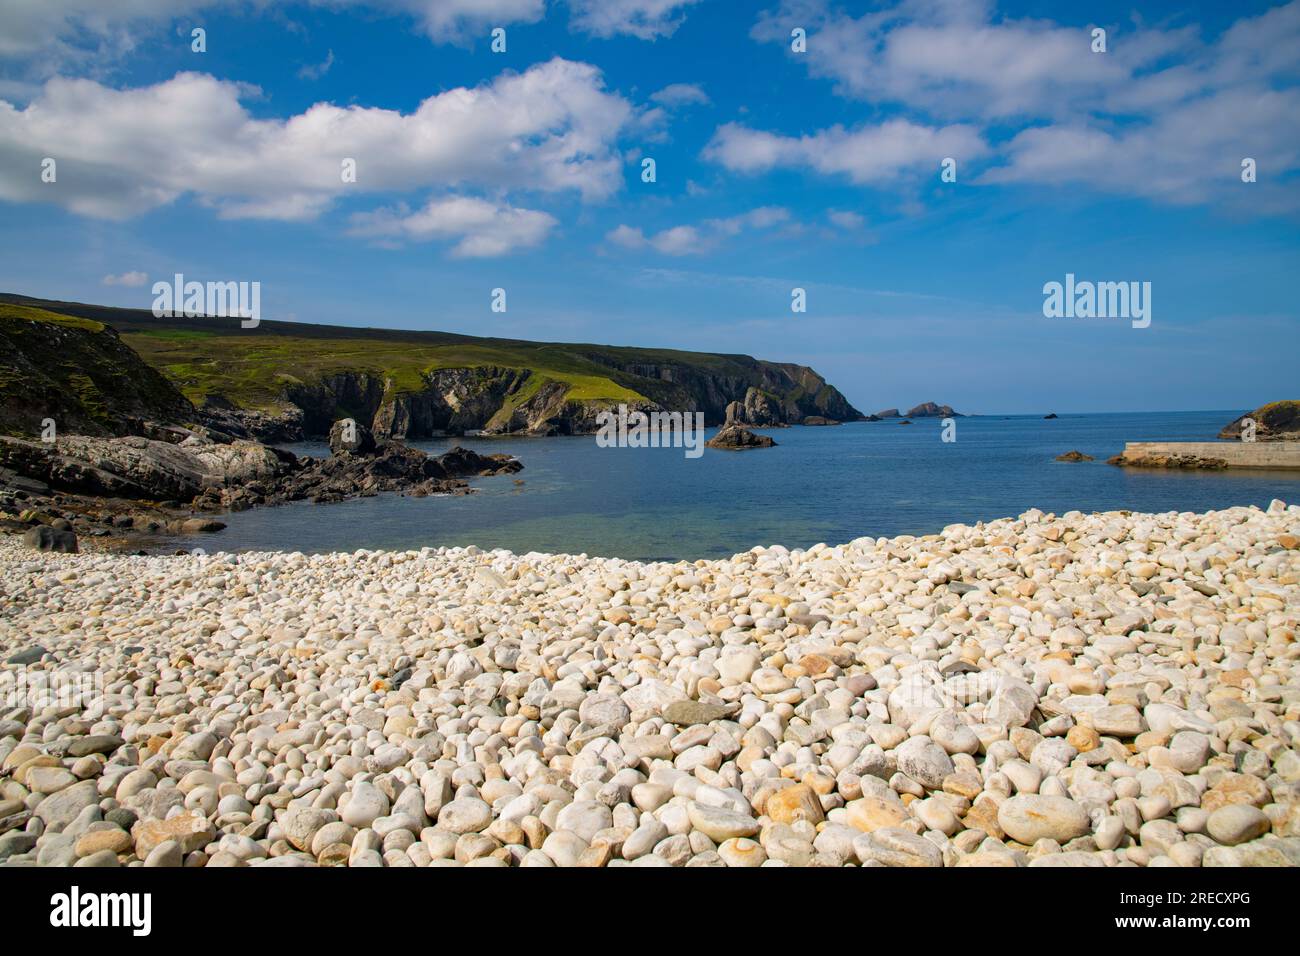 An Port, County Donegal, Wild Atlantic Way, Irland Stockfoto